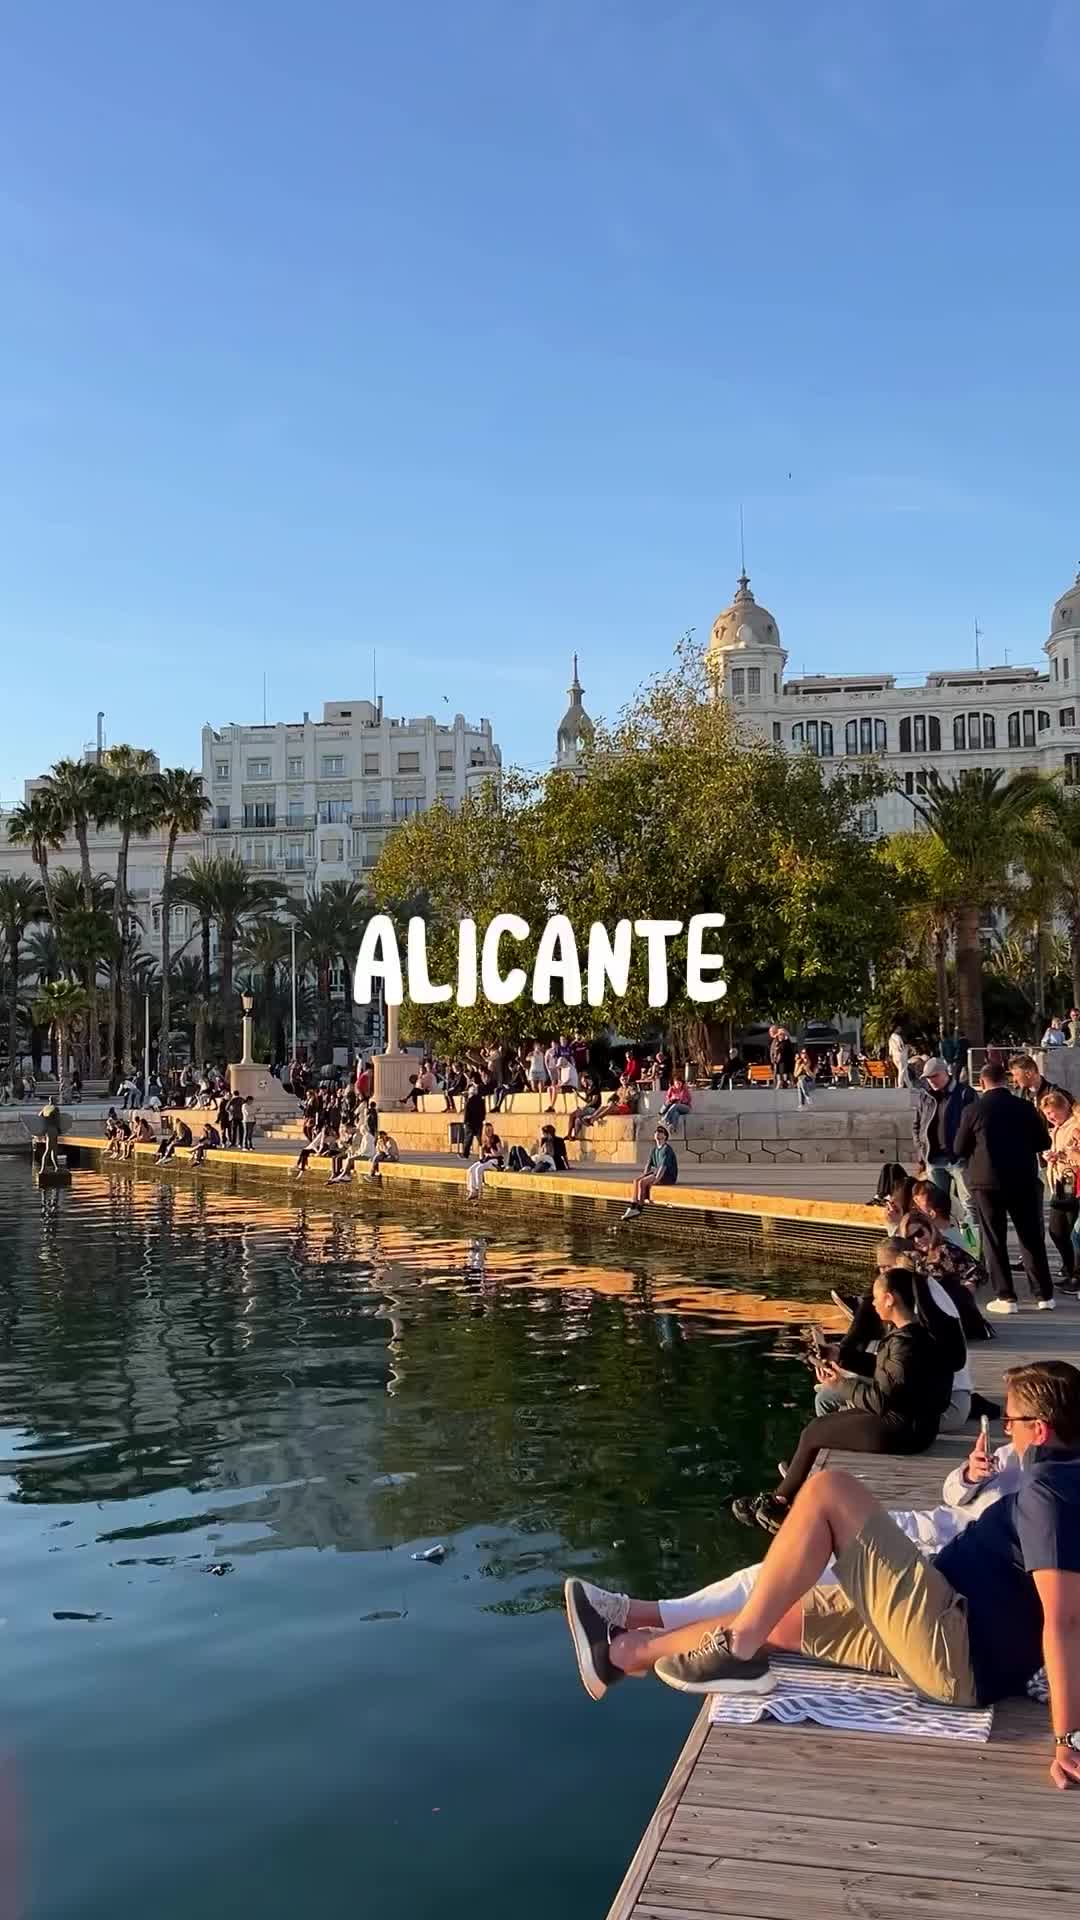 One Day in Alicante: A Perfect Day with Friends